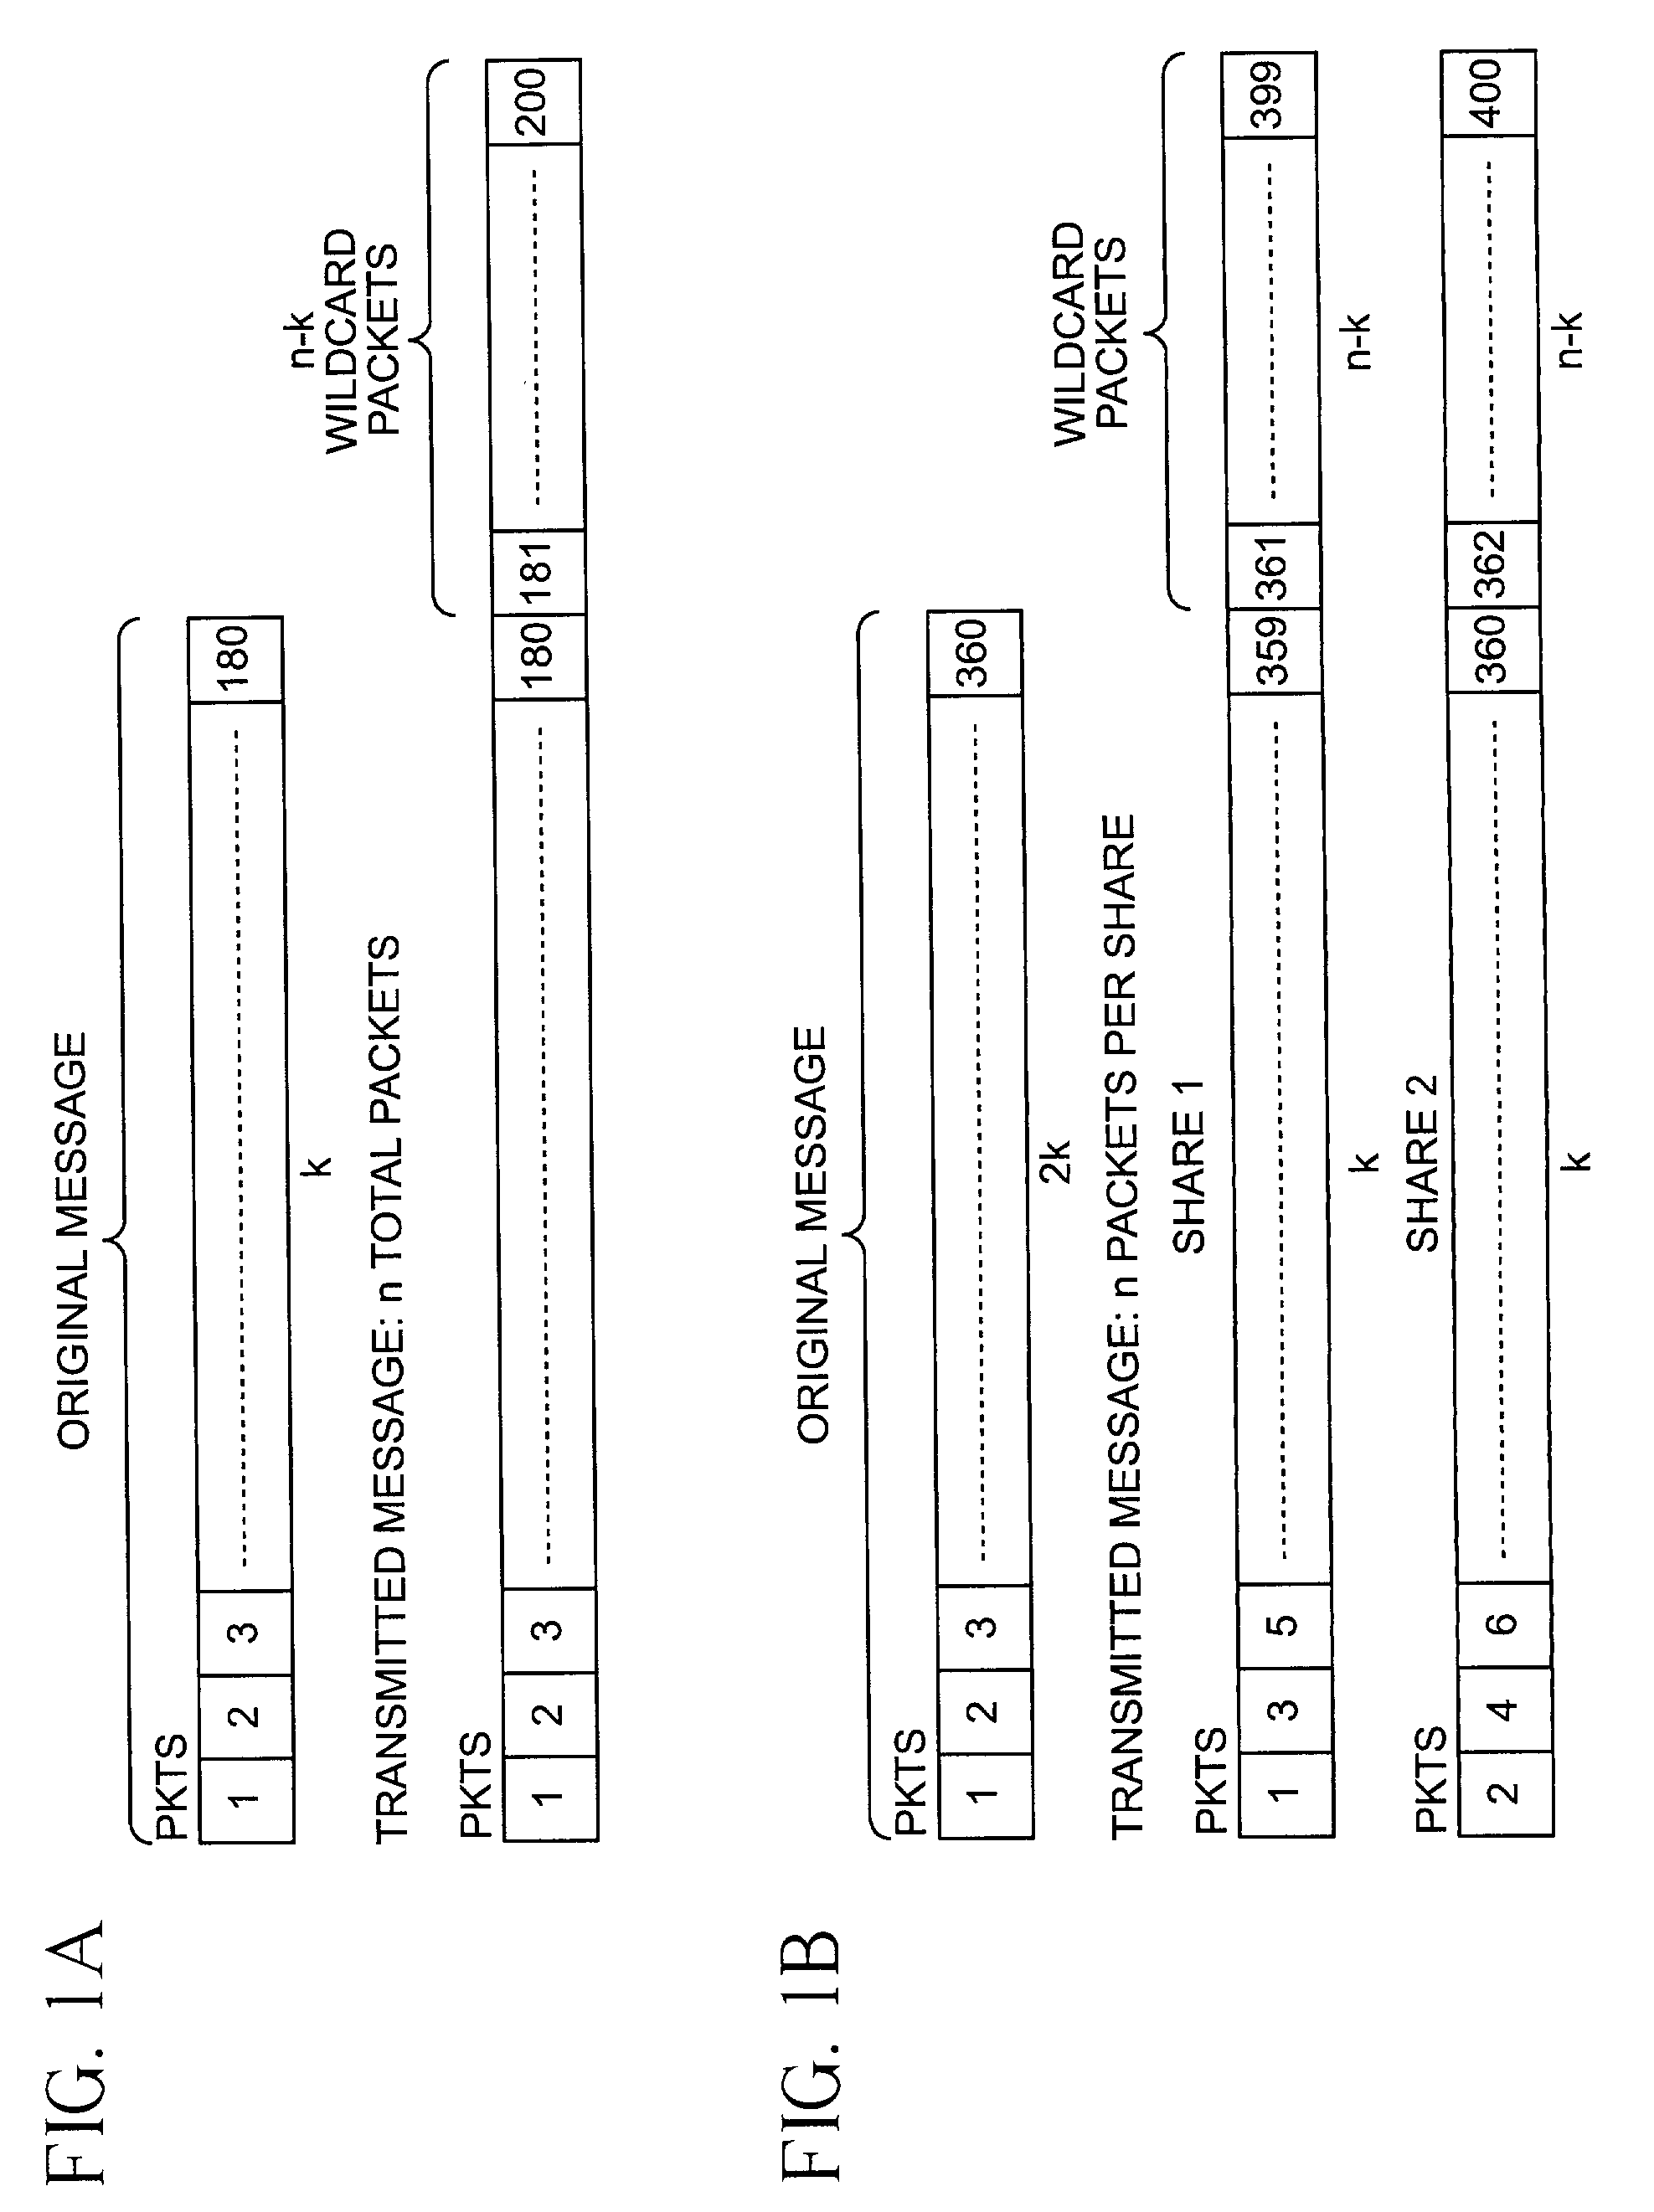 System for protecting the transmission of live data streams, and upon reception, for reconstructing the live data streams and recording them into files